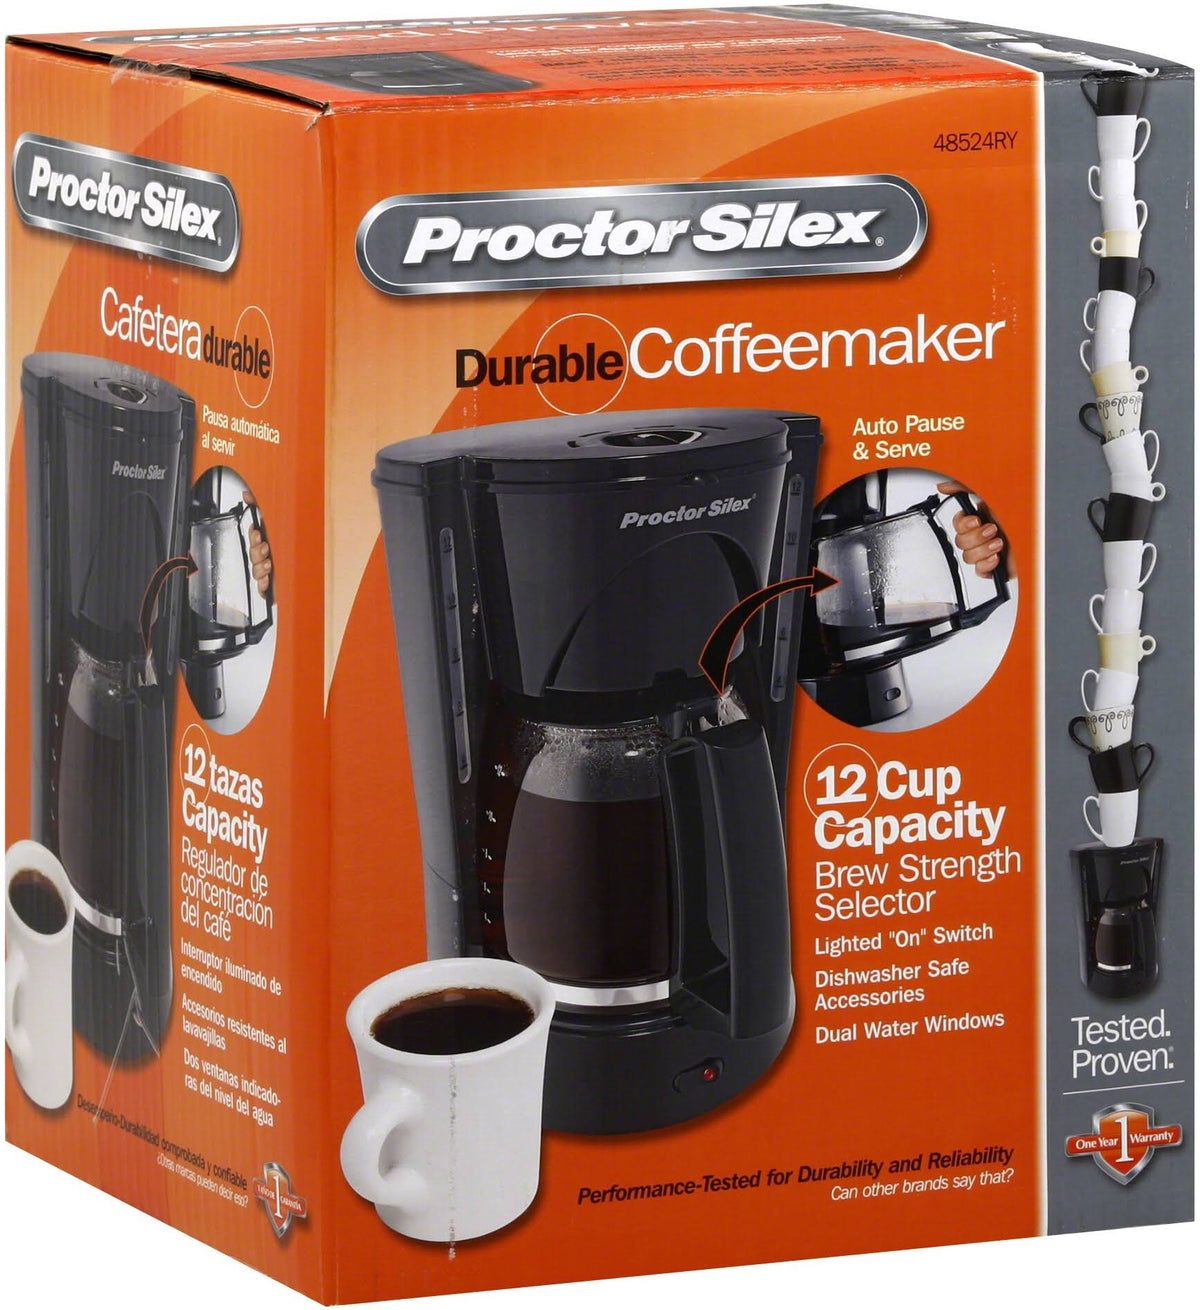 buy coffee & tea appliances at cheap rate in bulk. wholesale & retail appliance maintenance tools store.